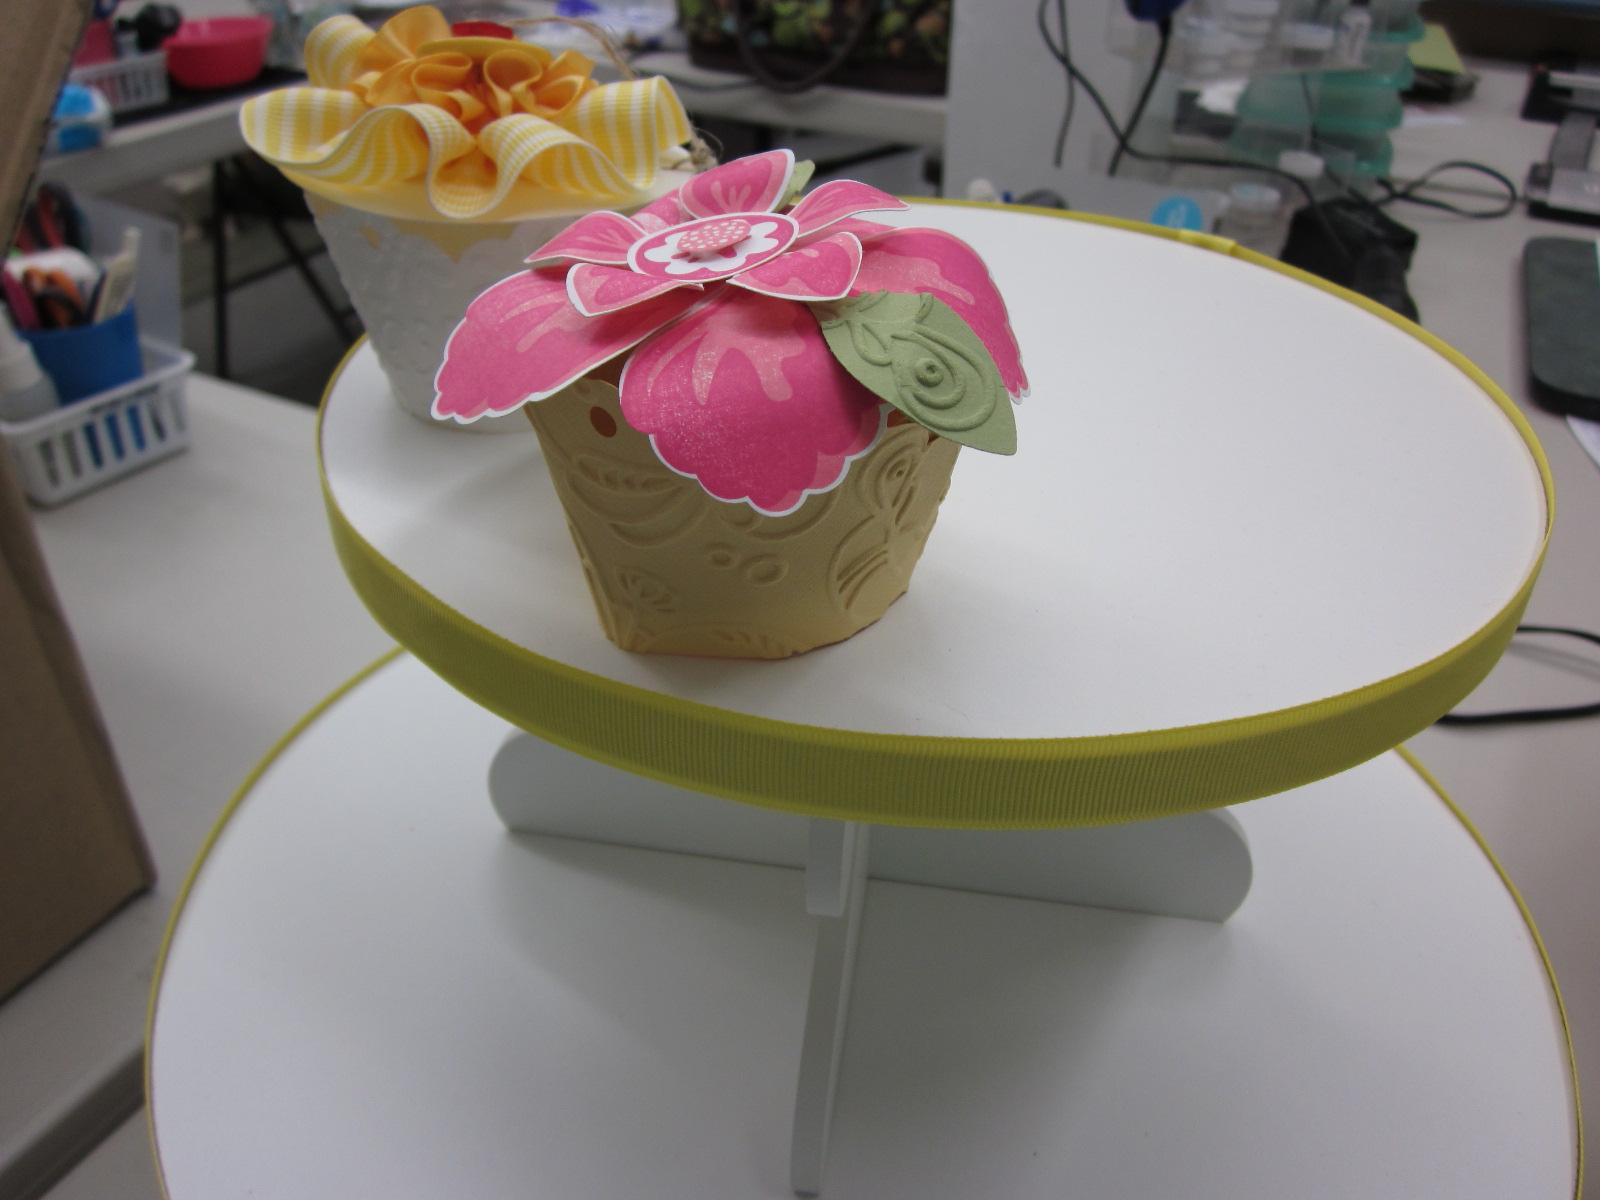 Check out my new cupcake stand